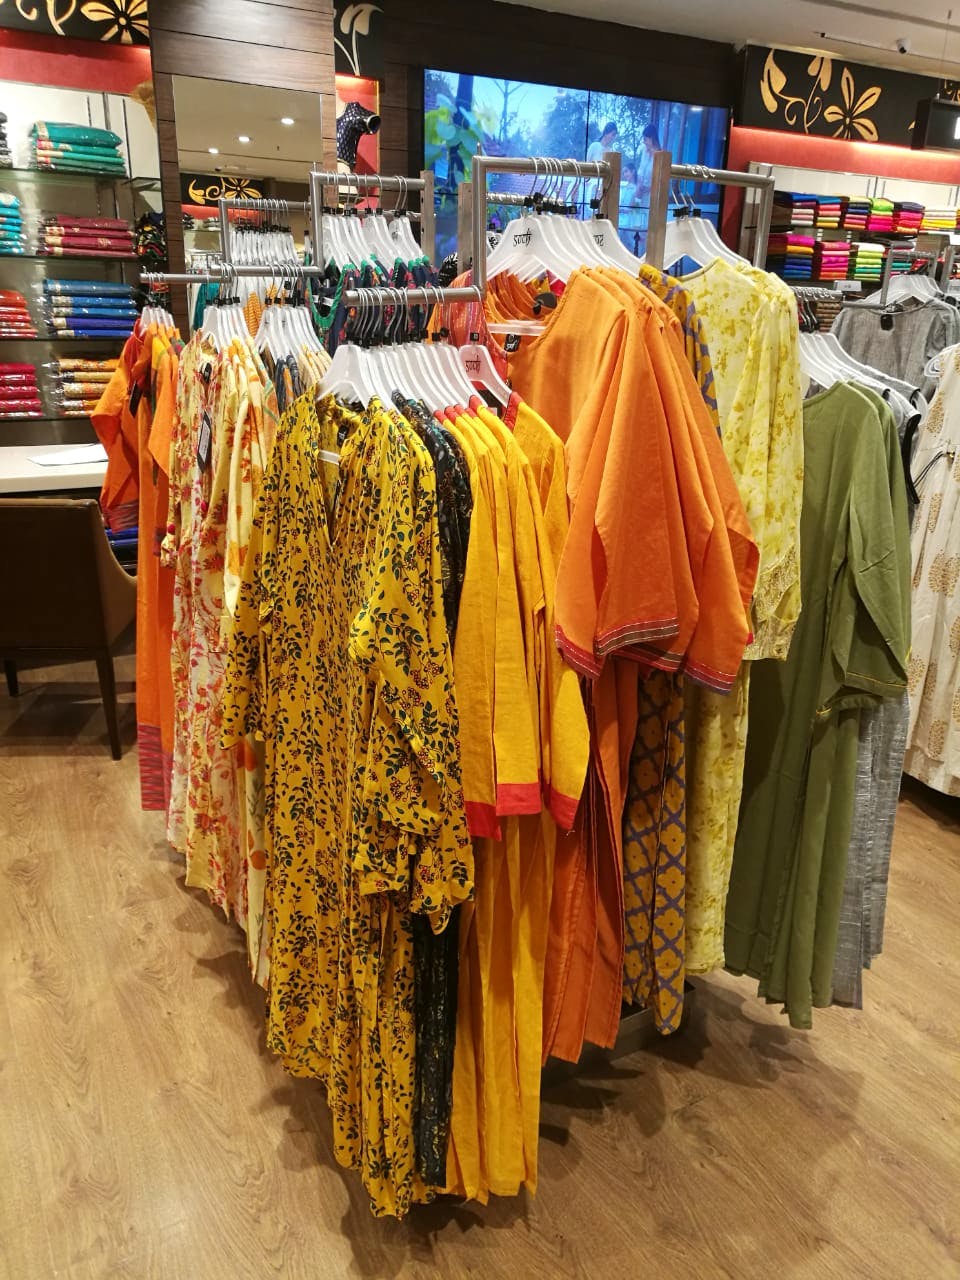 Bazaar,Clothing,Selling,Public space,Marketplace,Market,Outlet store,Boutique,Yellow,Retail